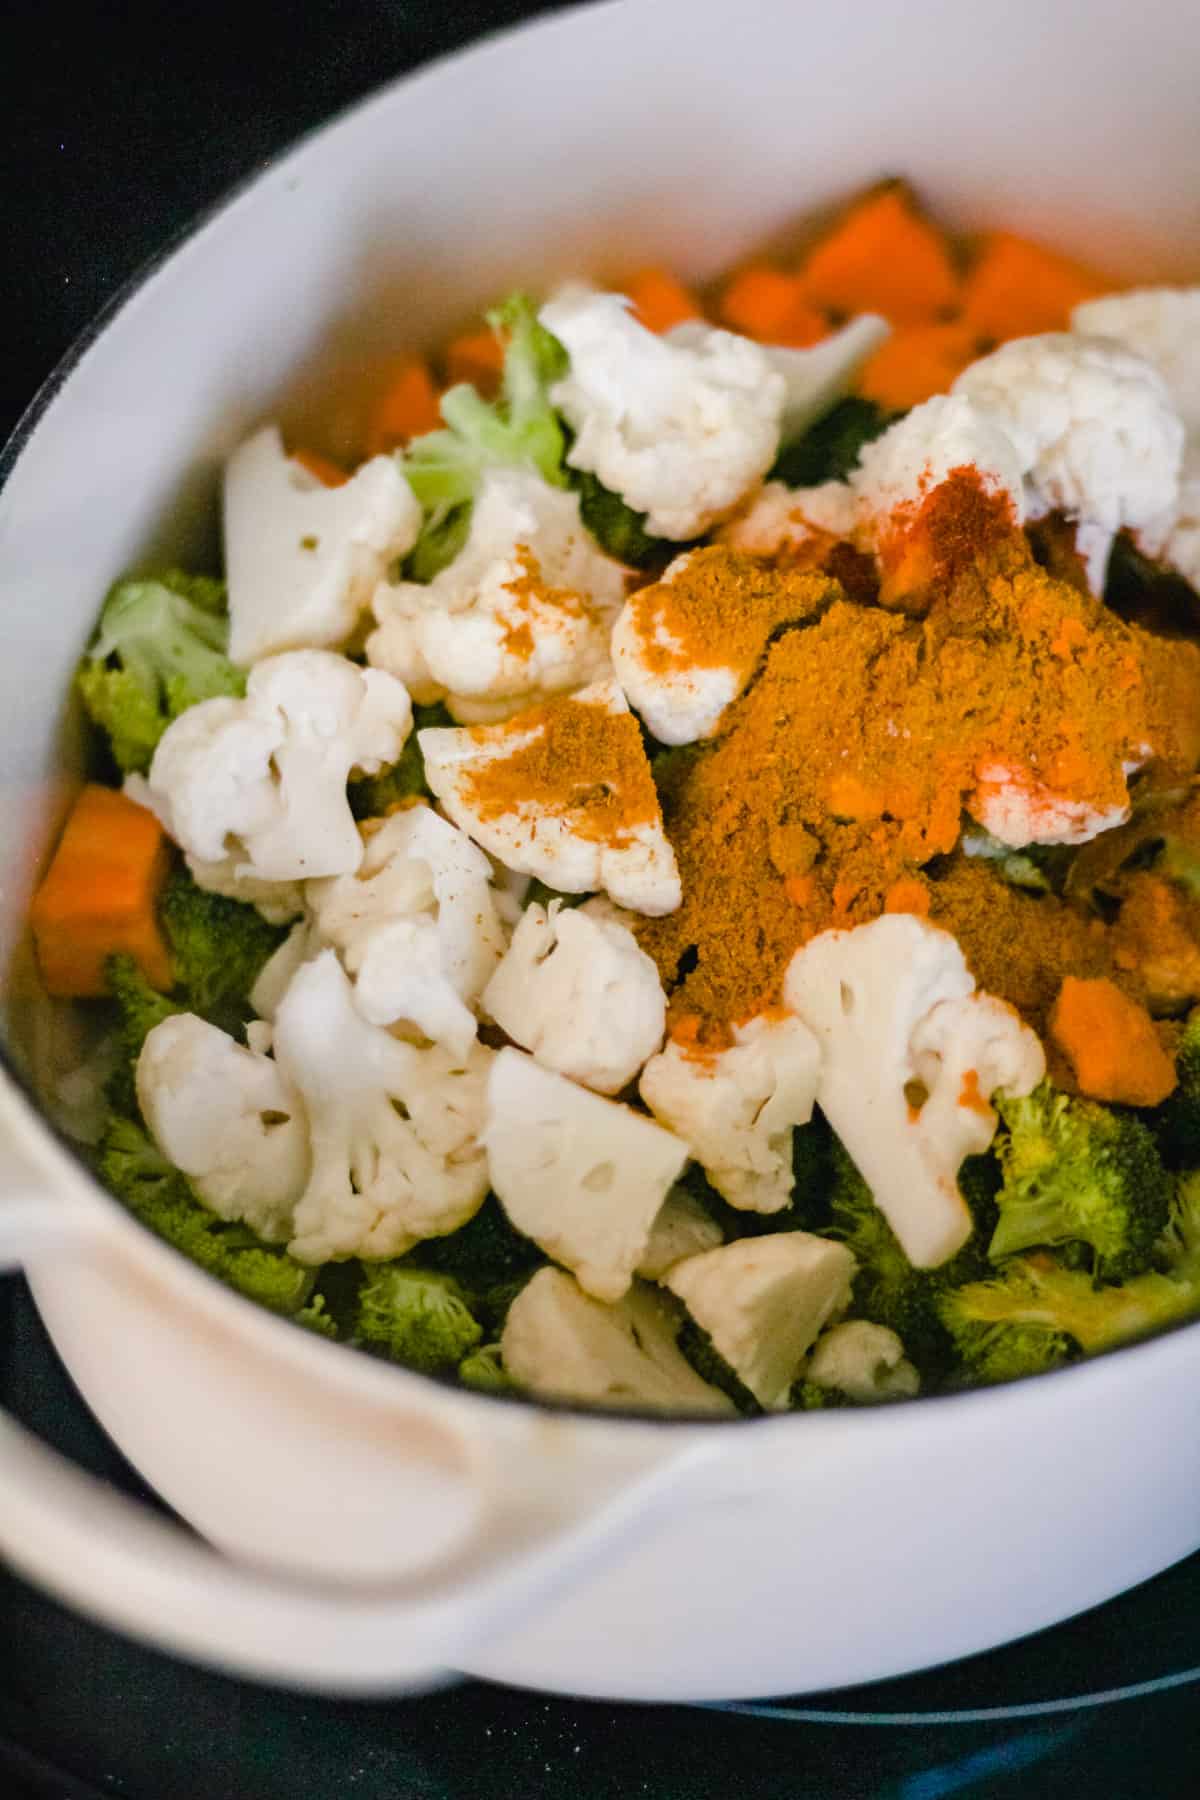 Add dried vegetables and spices to the Dutch oven to make pumpkin curry.